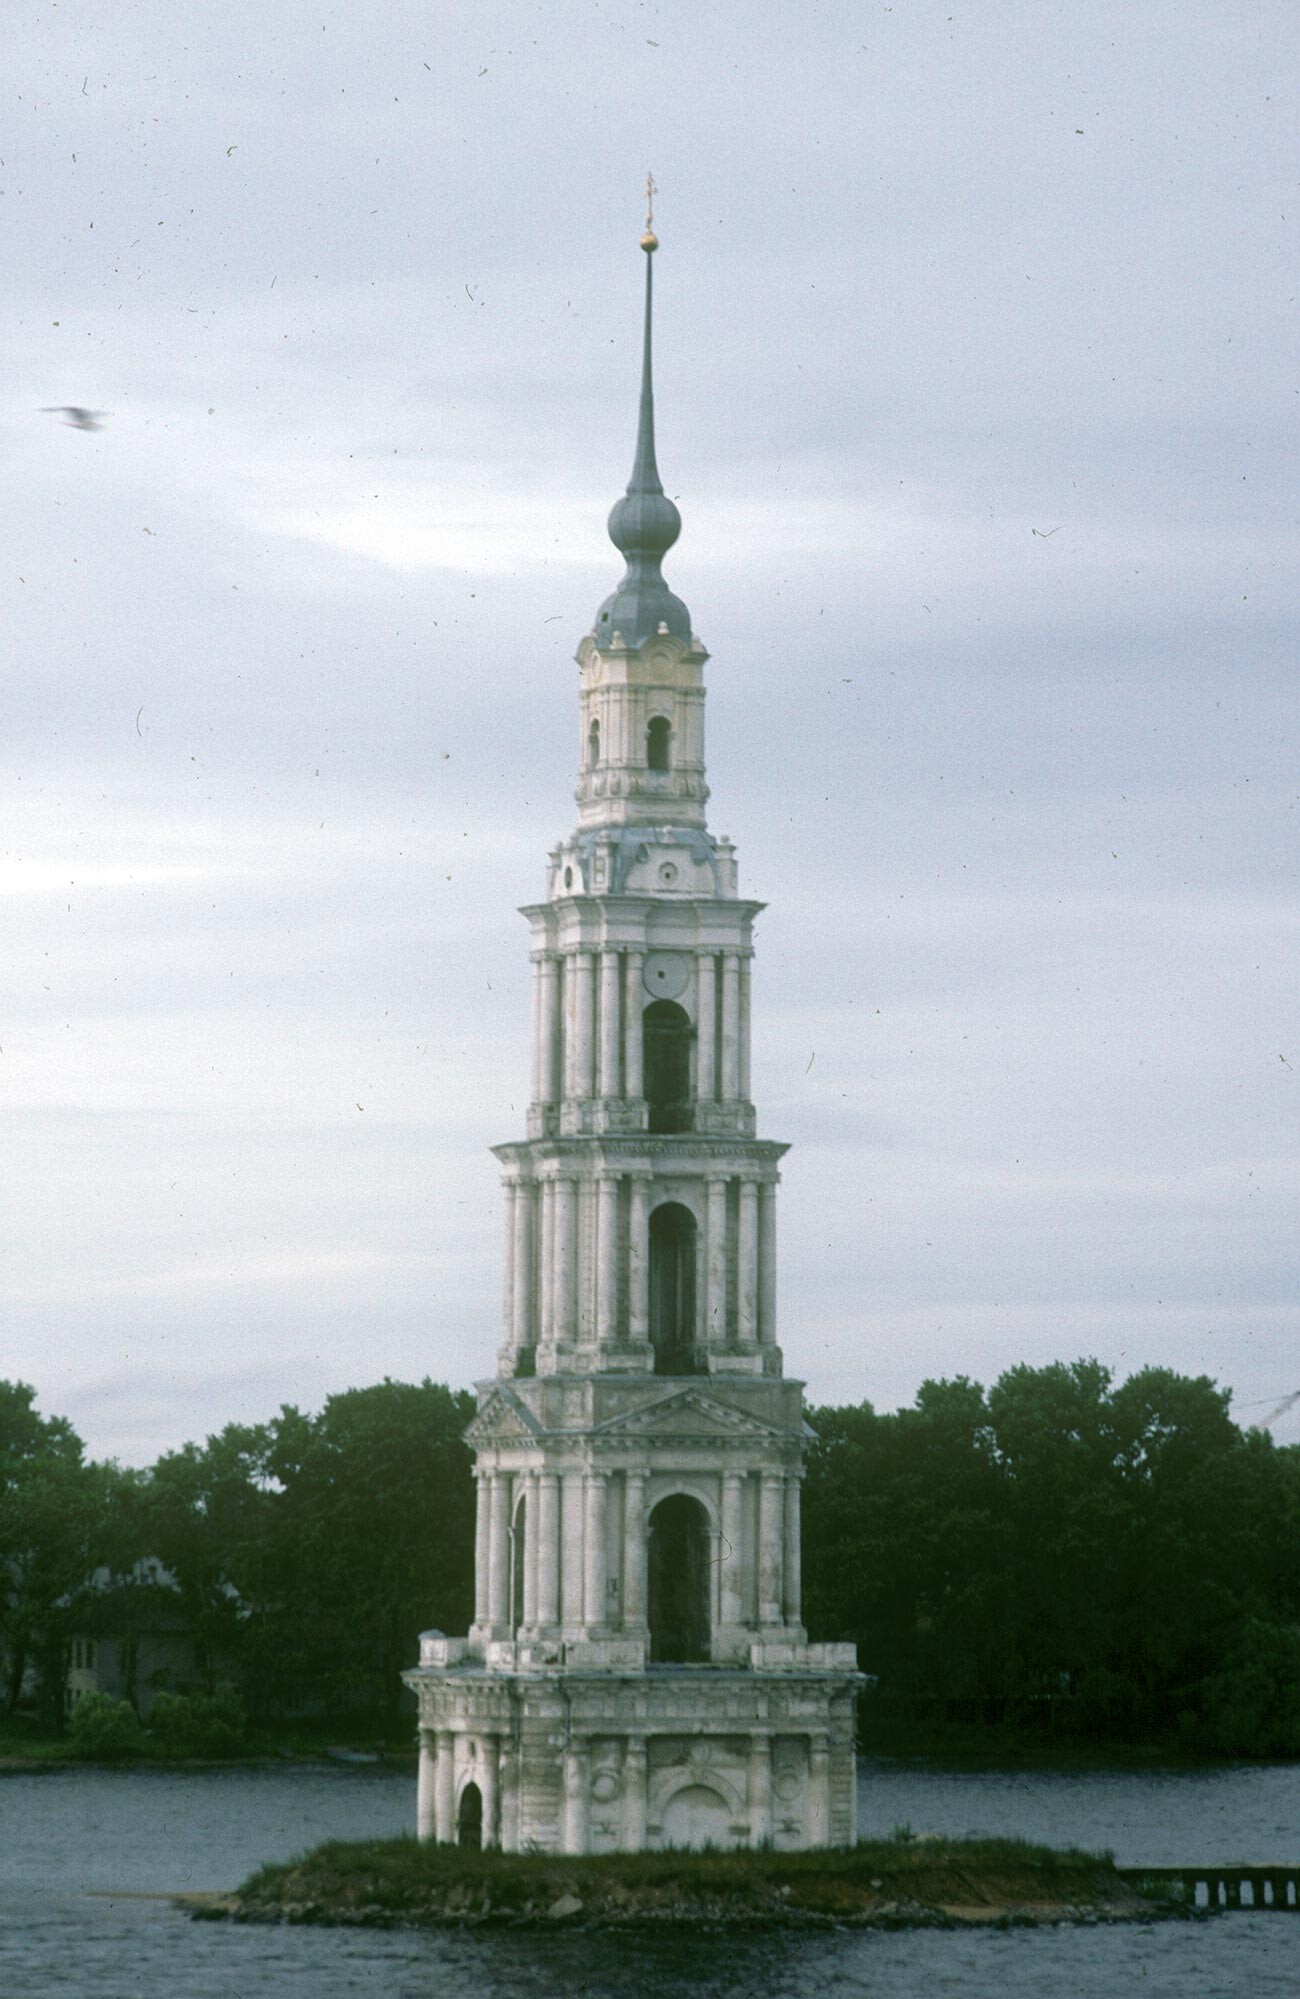 Kalyazin. Bell tower of the Cathedral of St. Nicholas. Cathedral was demolished during the creation of the Uglich Reservoir (part of the Volga River), but the bell tower remained as a beacon. August 9, 1991